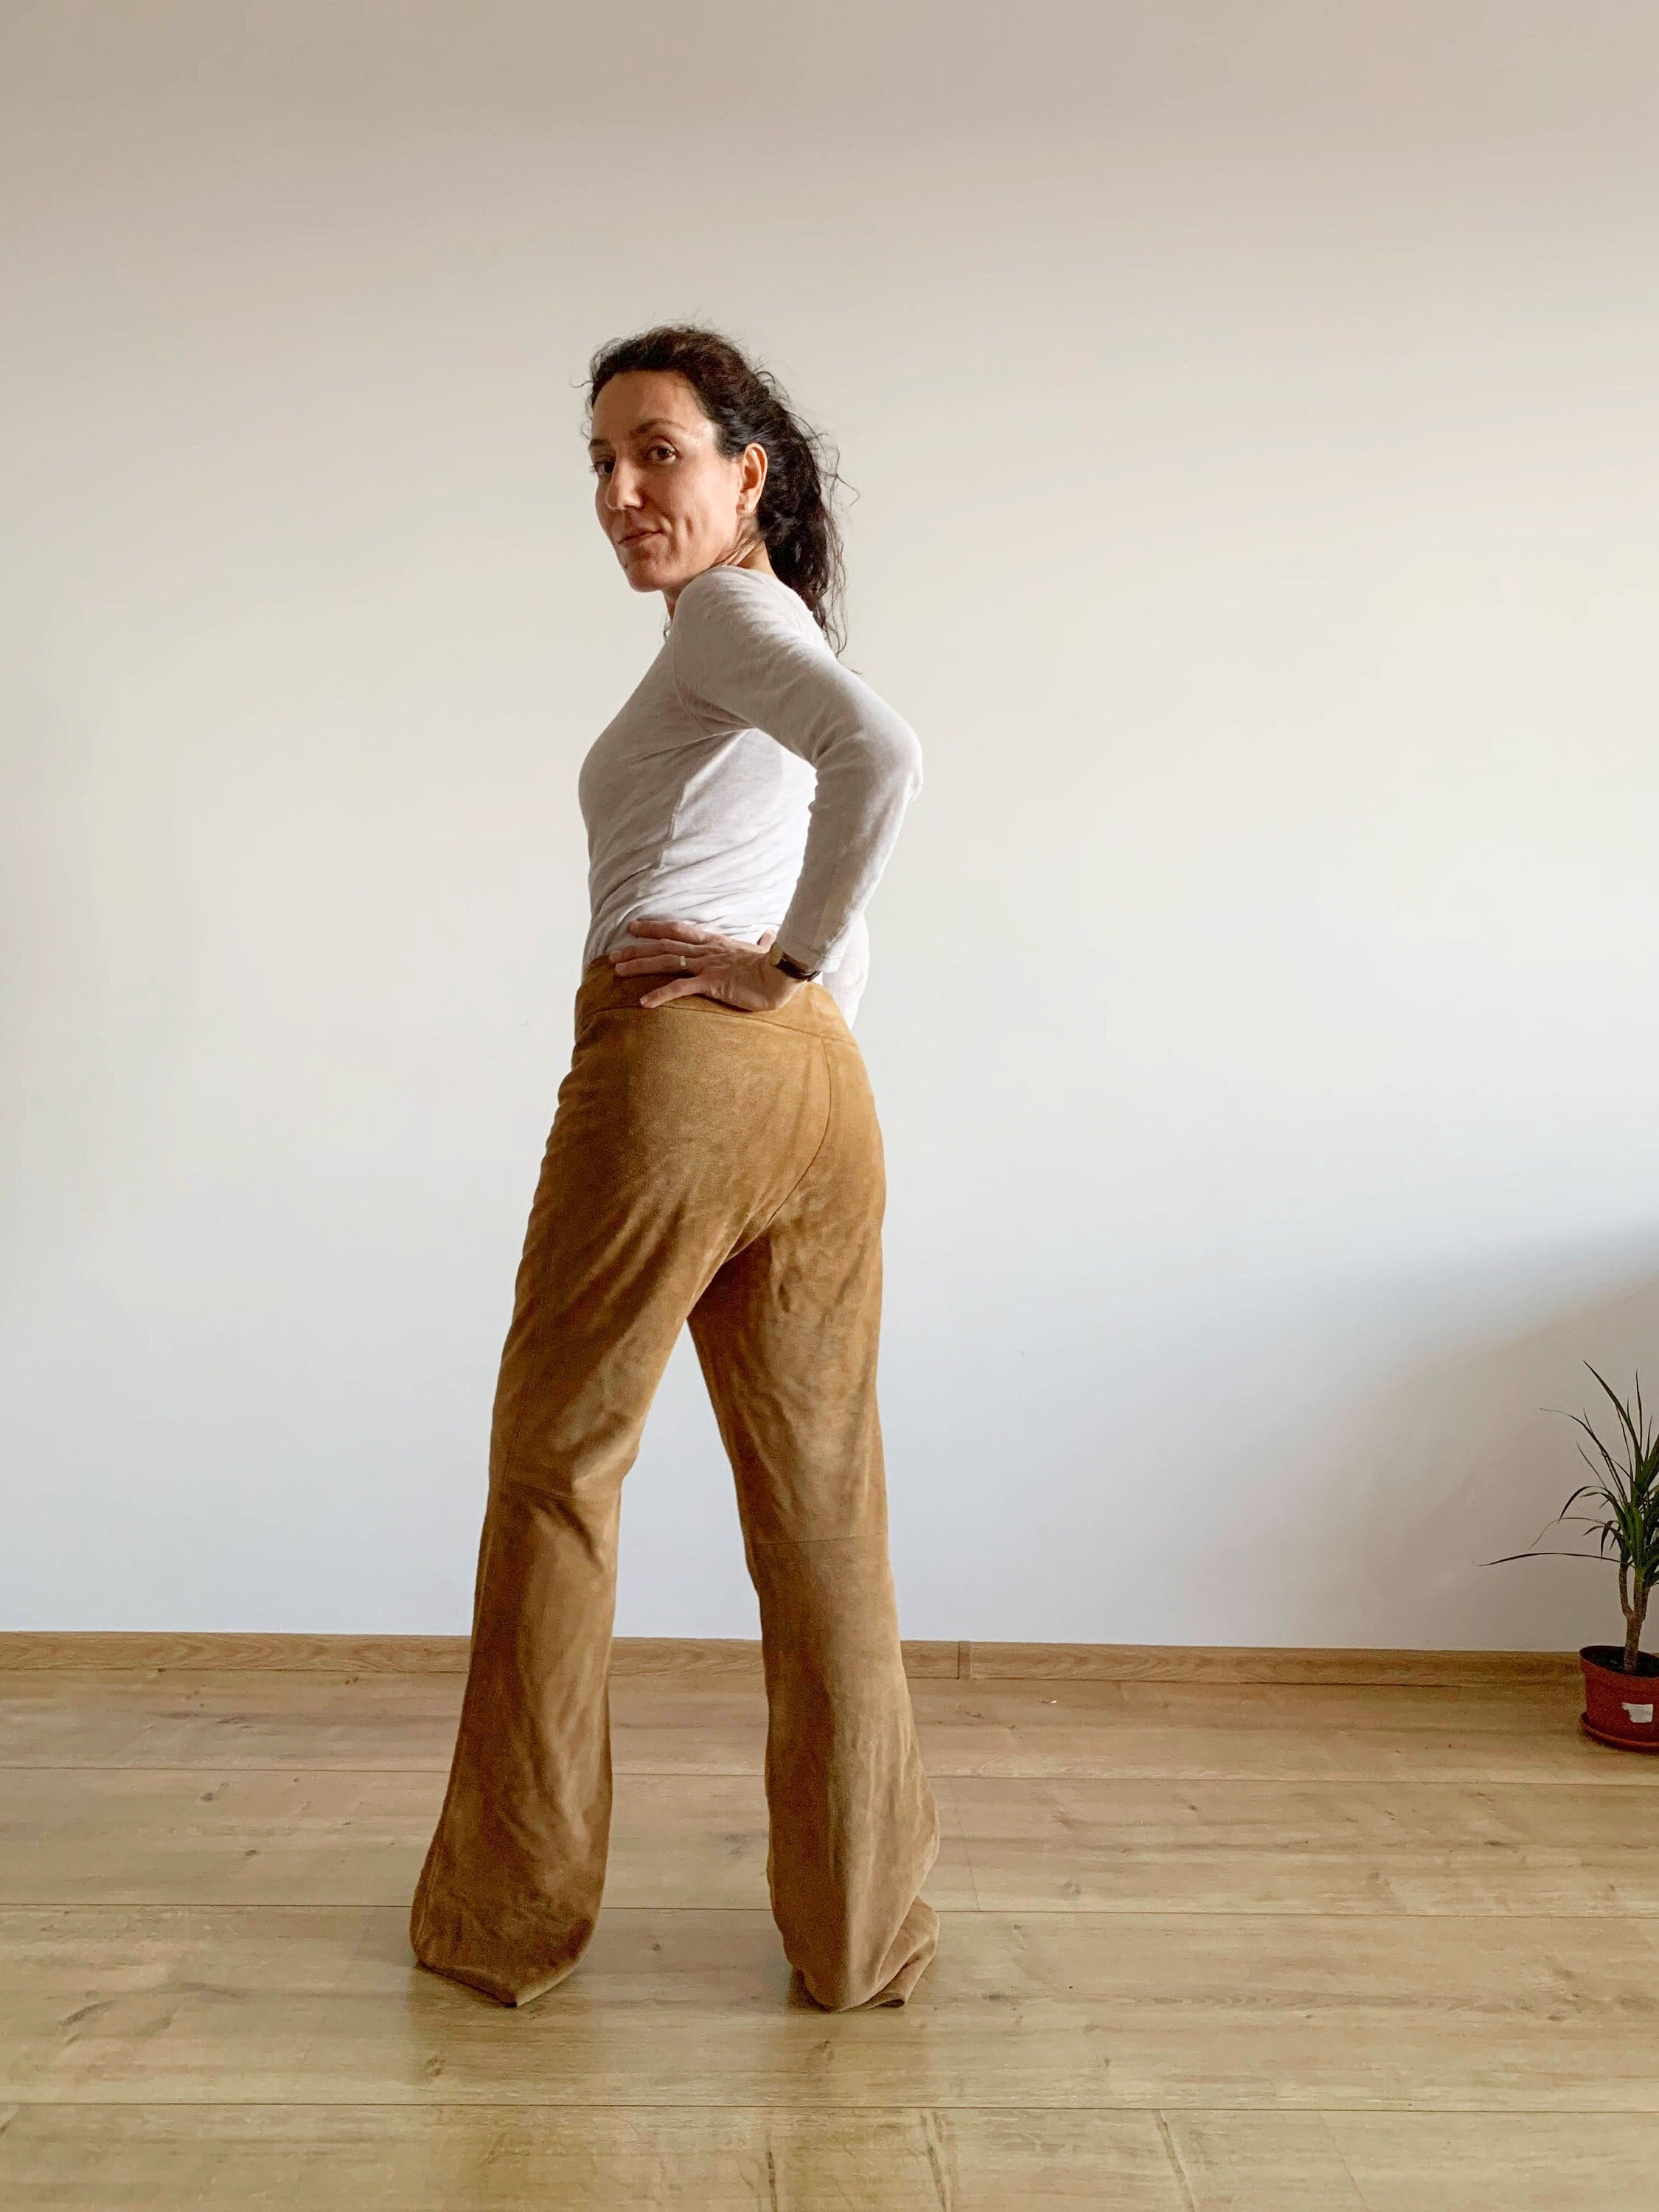 Stepping into fall with style in these camel faux suede pants. 🍂✨ #suede  #suedepants #fallfashion #fallstyles #suedestyle #newpant